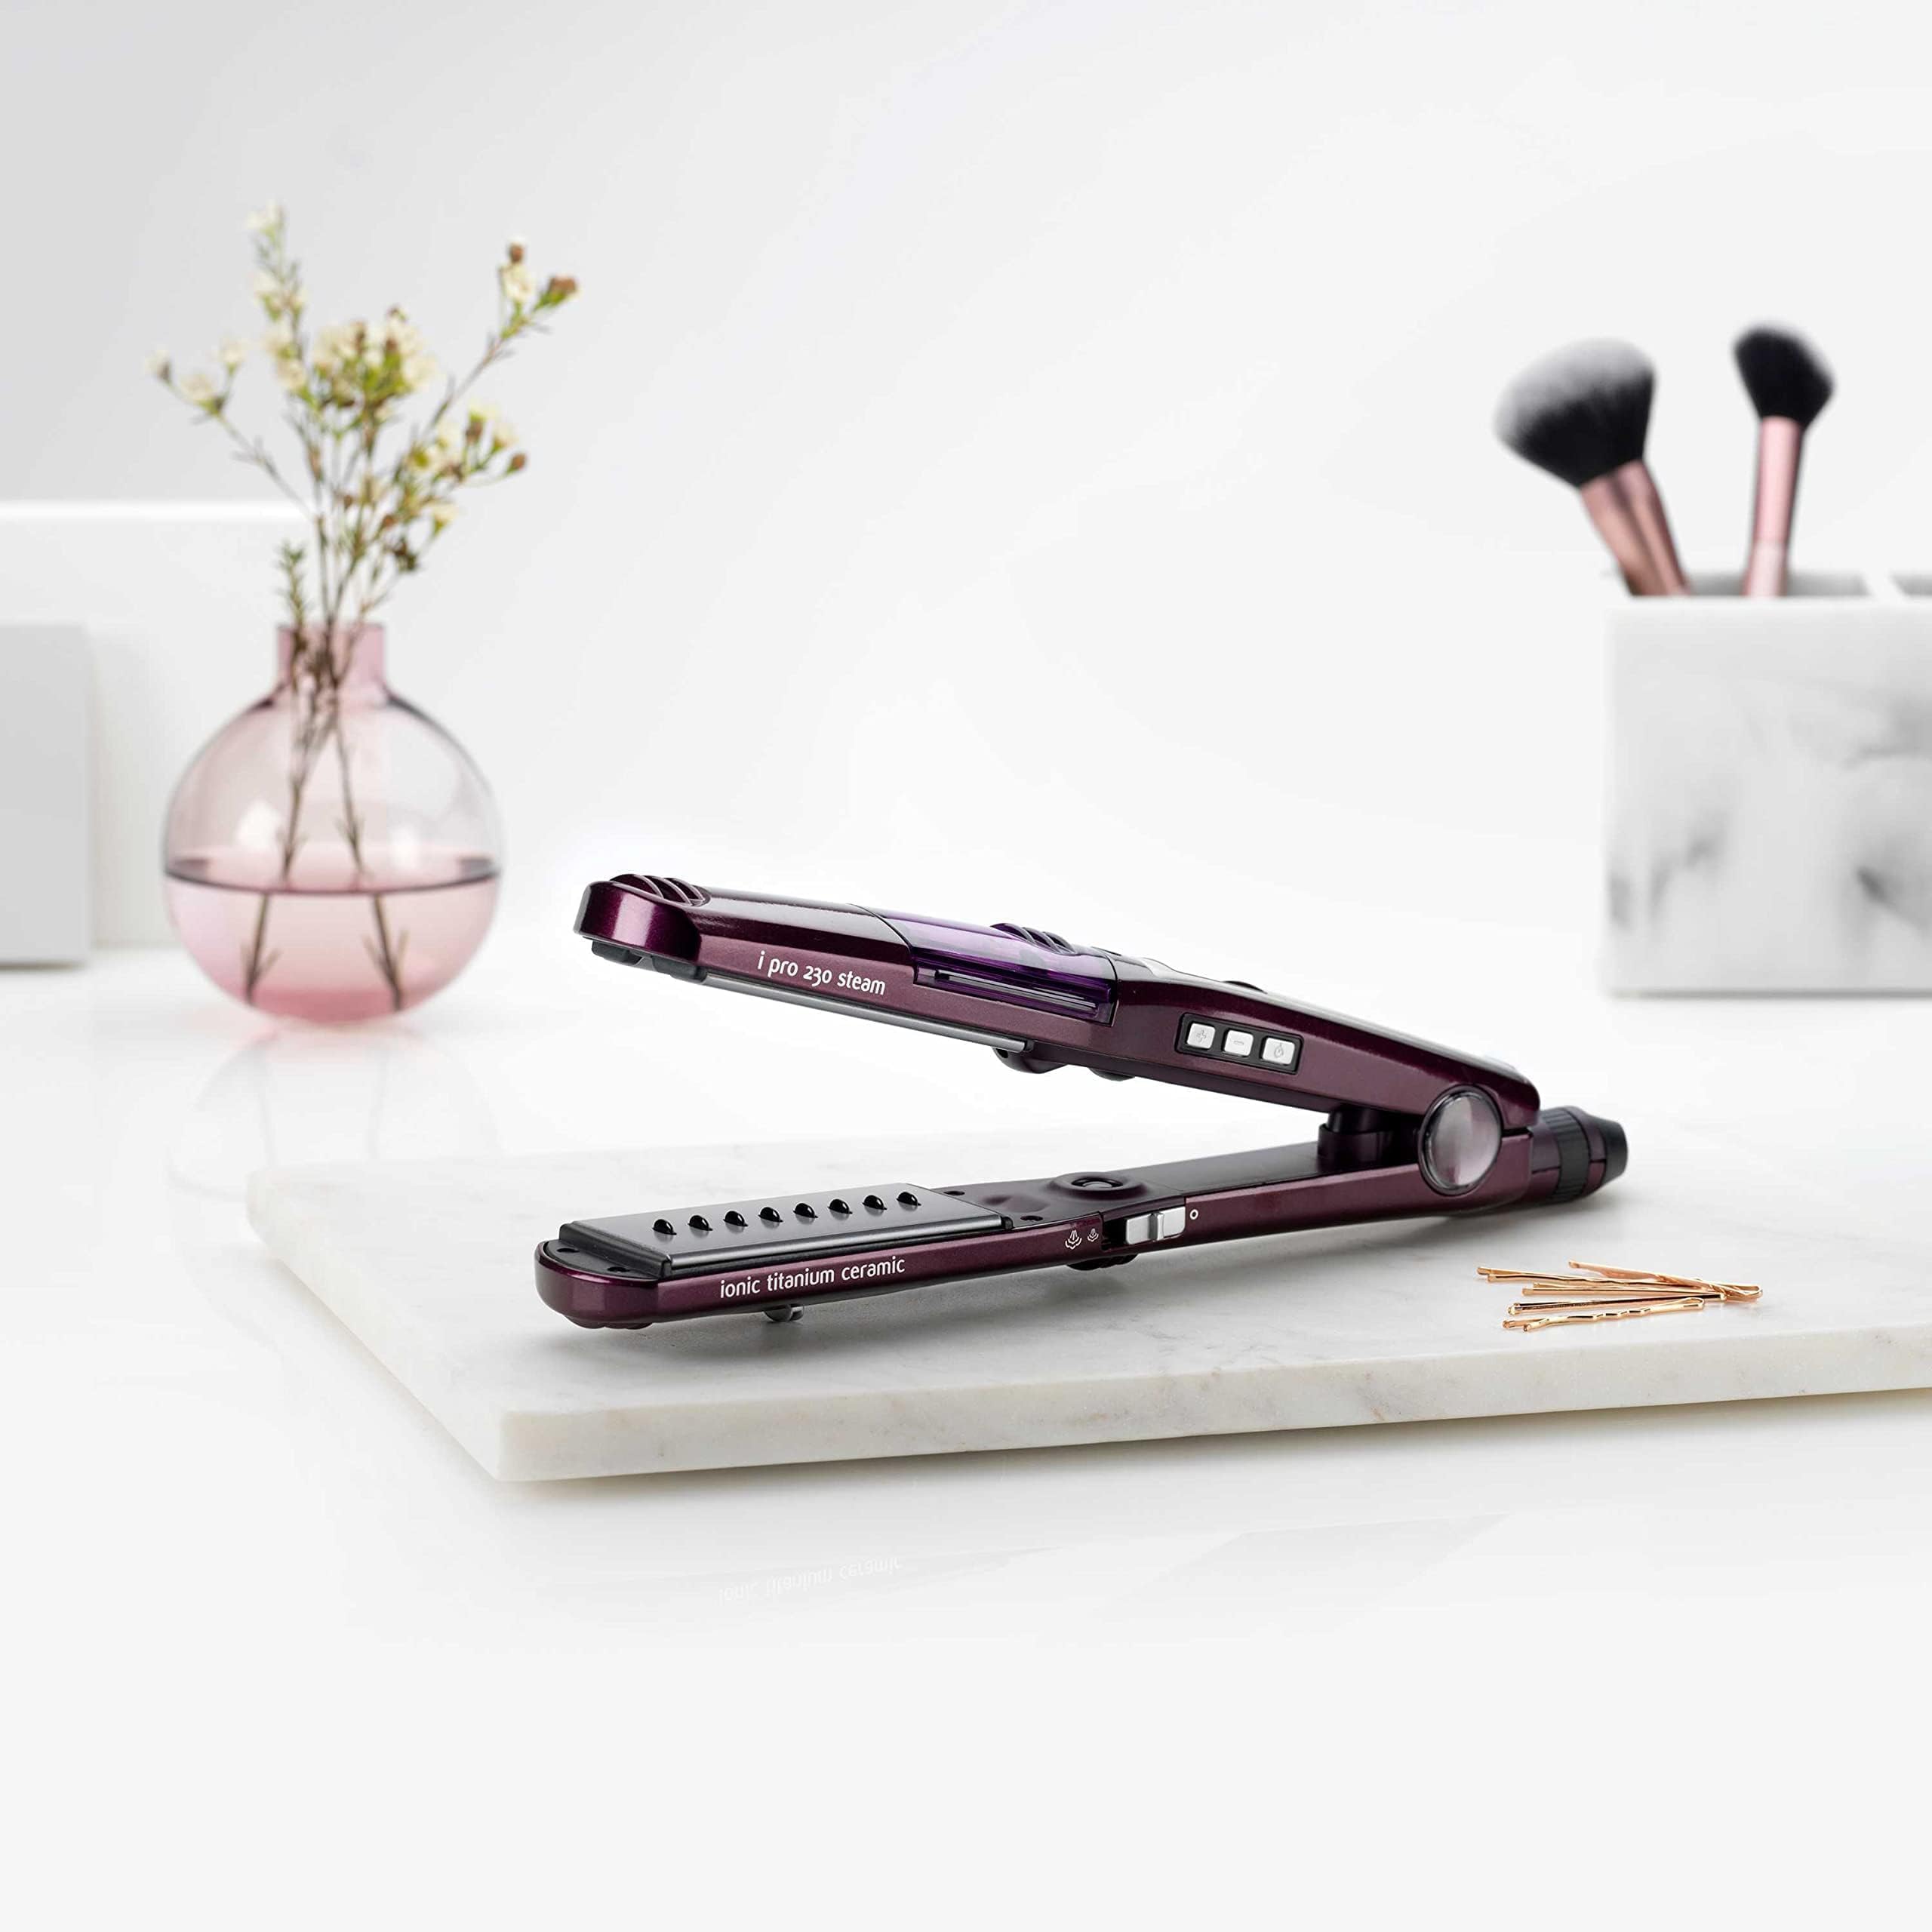 BaByliss 369 Hair Straightener| Nano Titanium Ceramic Coating: Soft And Strong.| High-performance Heating Up To 230°c | Ceramic Plates For Smooth And Shiny Results | ST395SDE(Purple), One Size